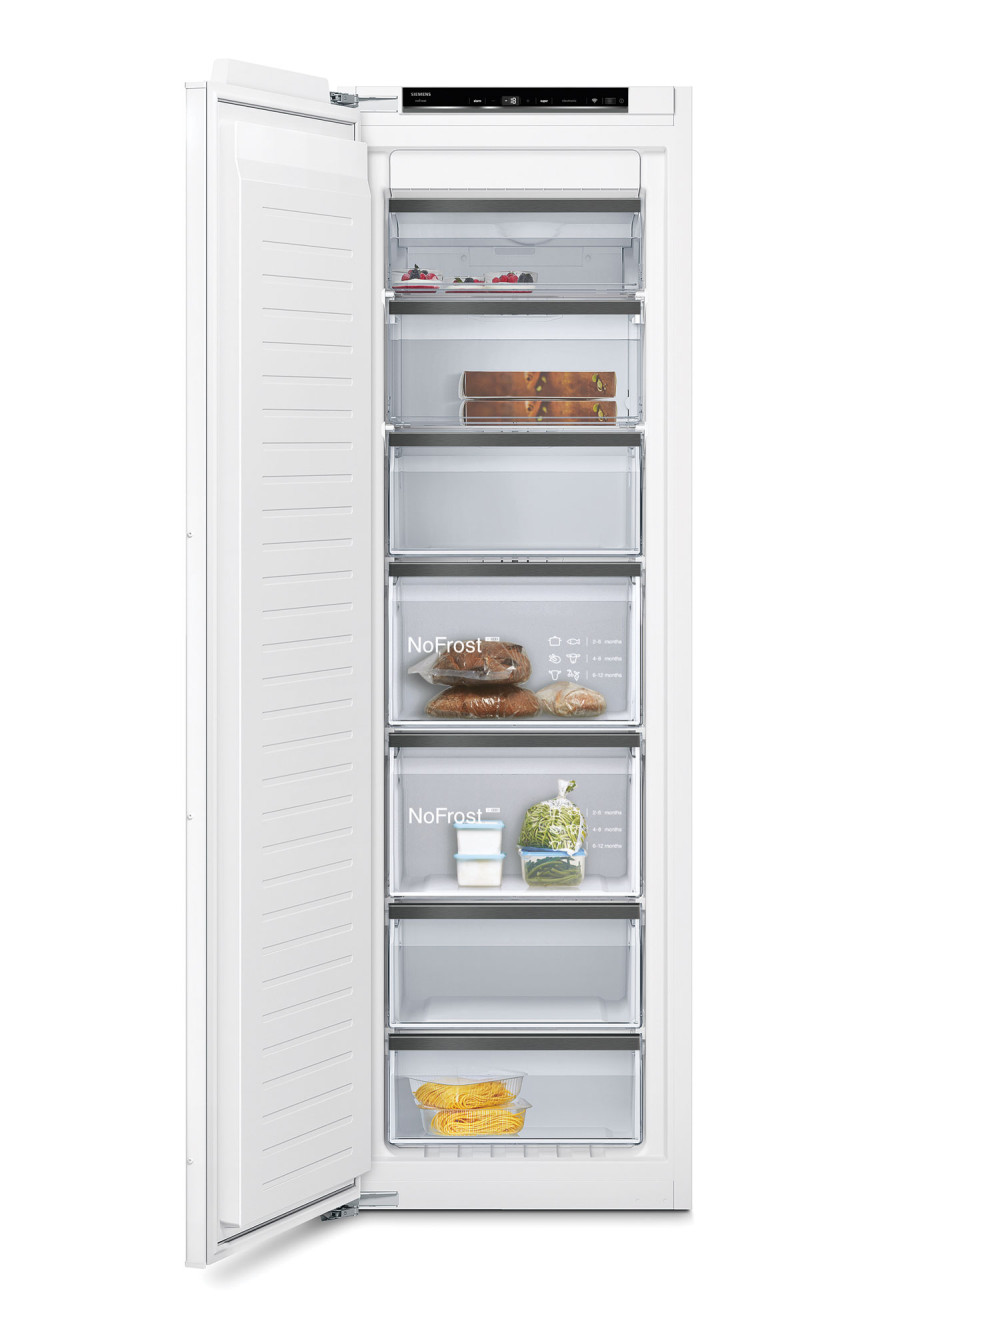 Siemens GI81NHCE0G iQ700 Built-in Freezer featured image